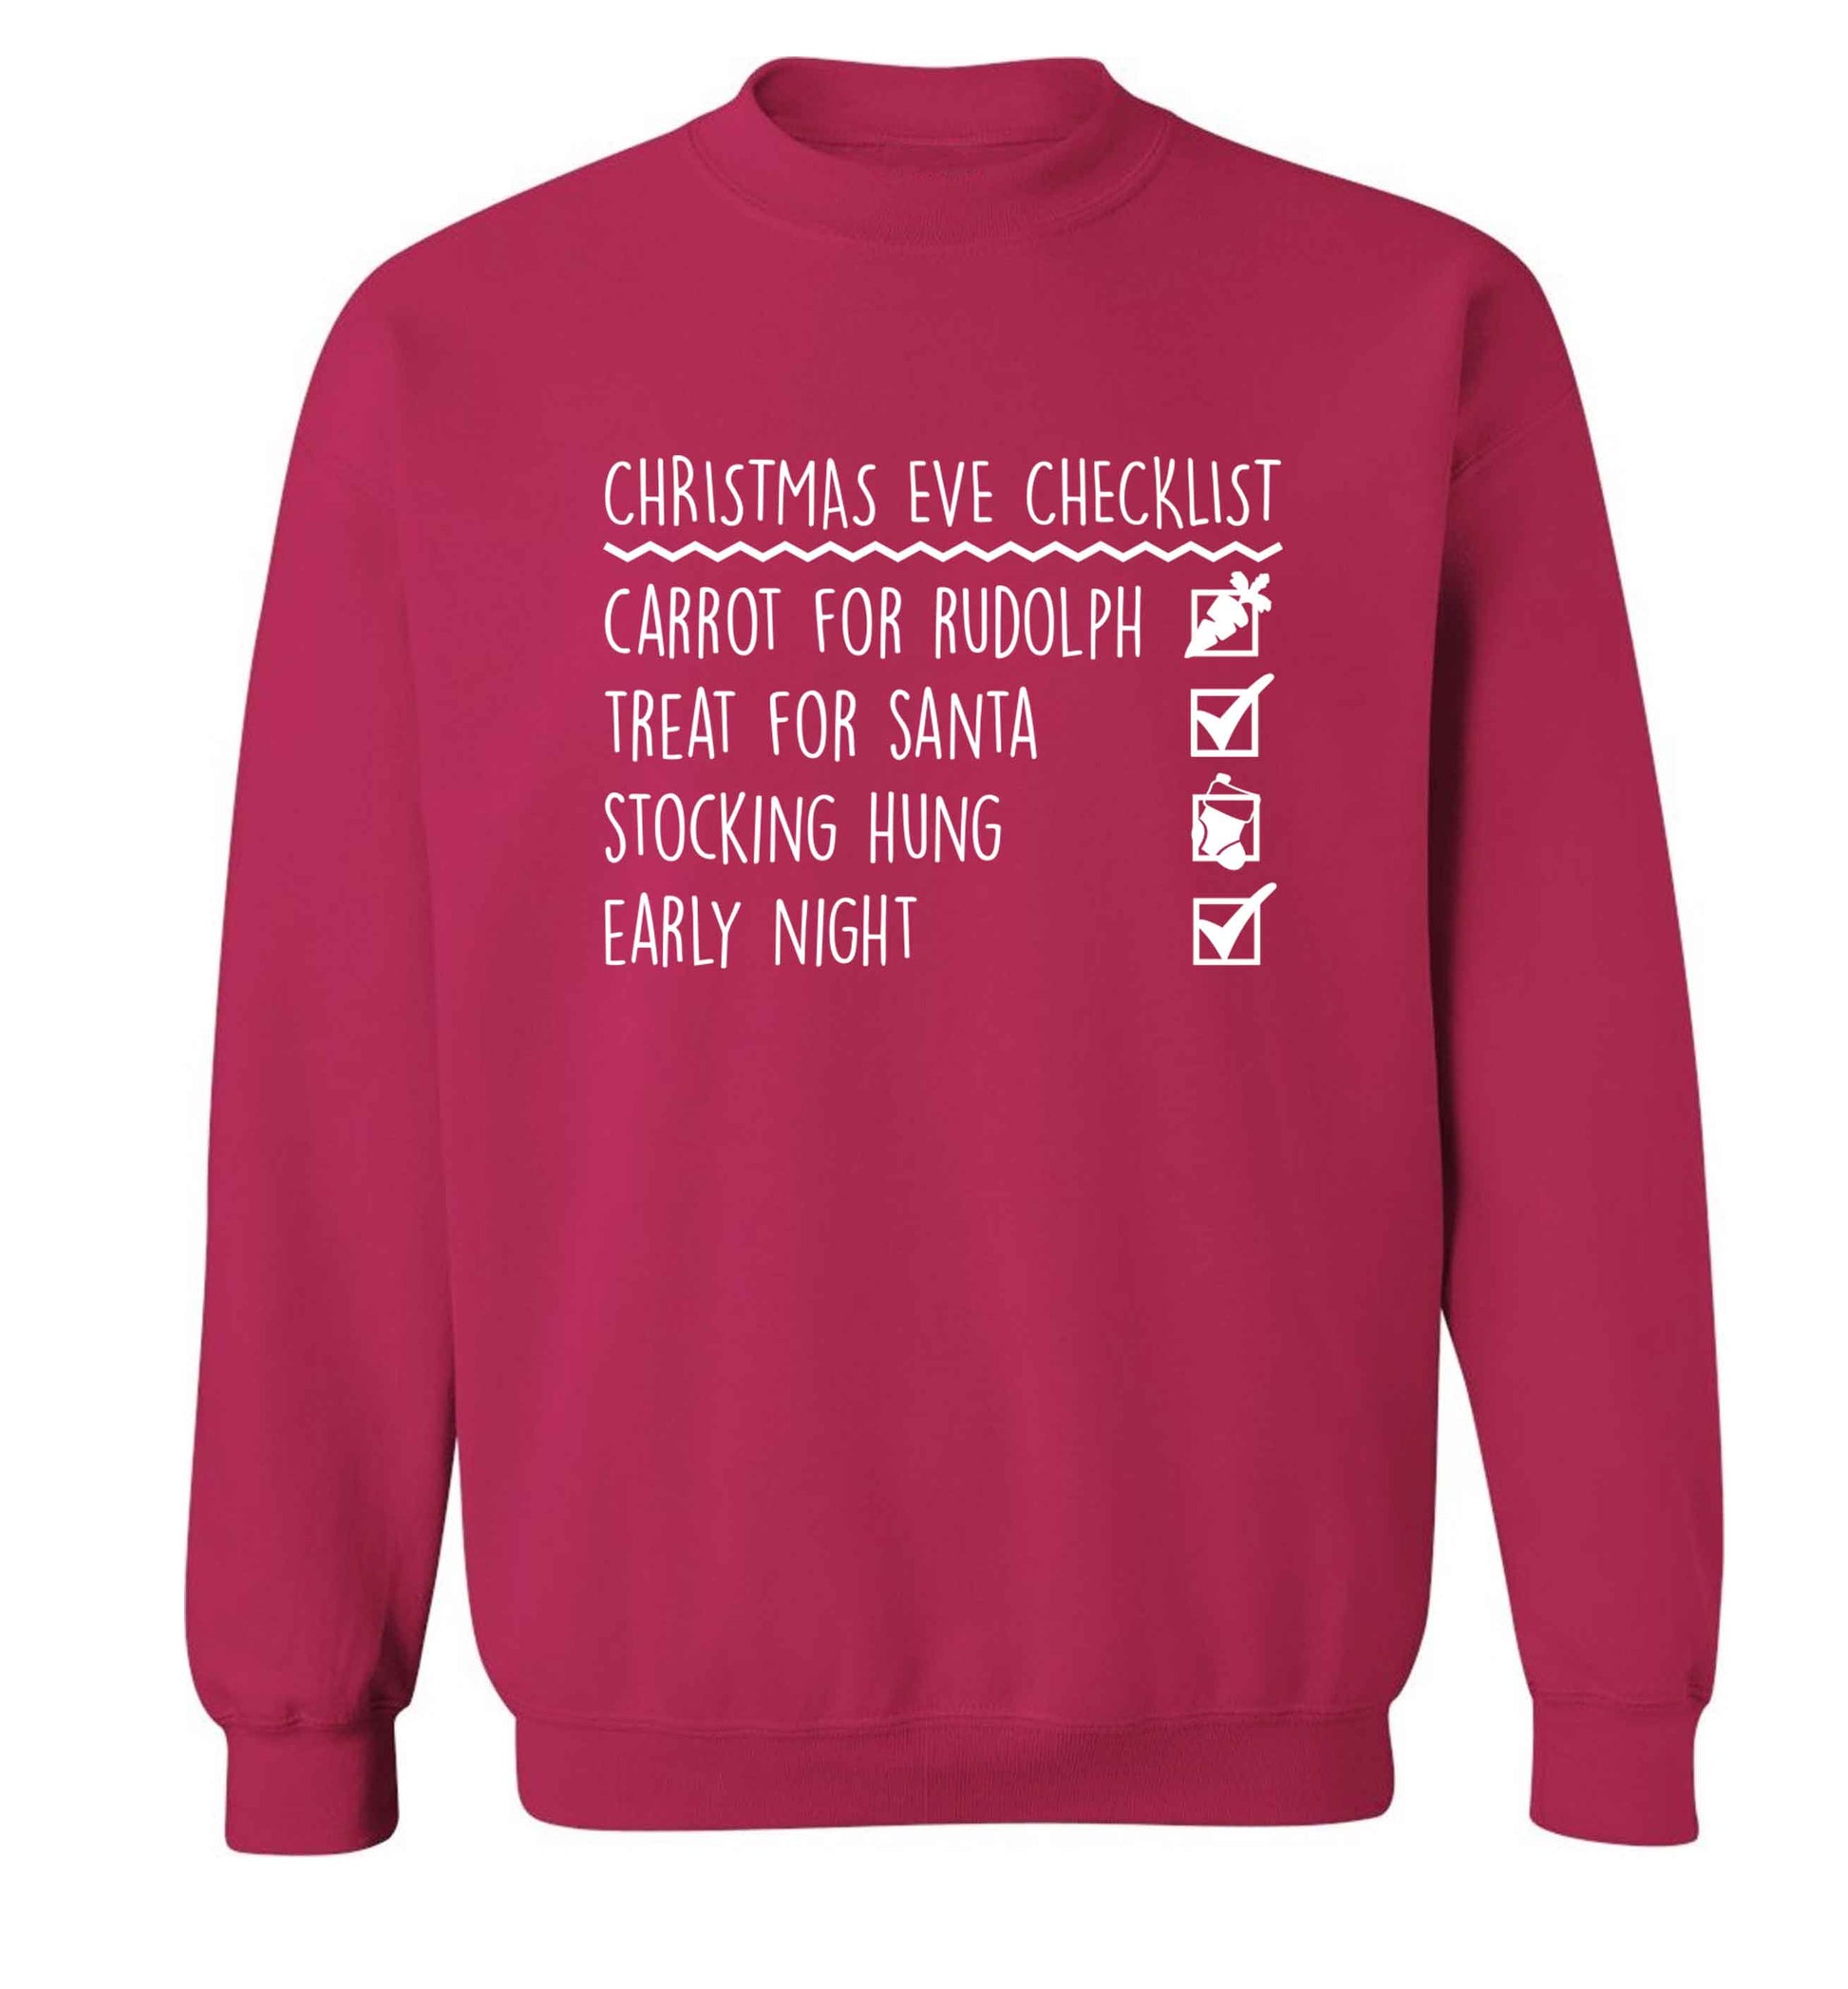 Candy Canes Candy Corns adult's unisex pink sweater 2XL